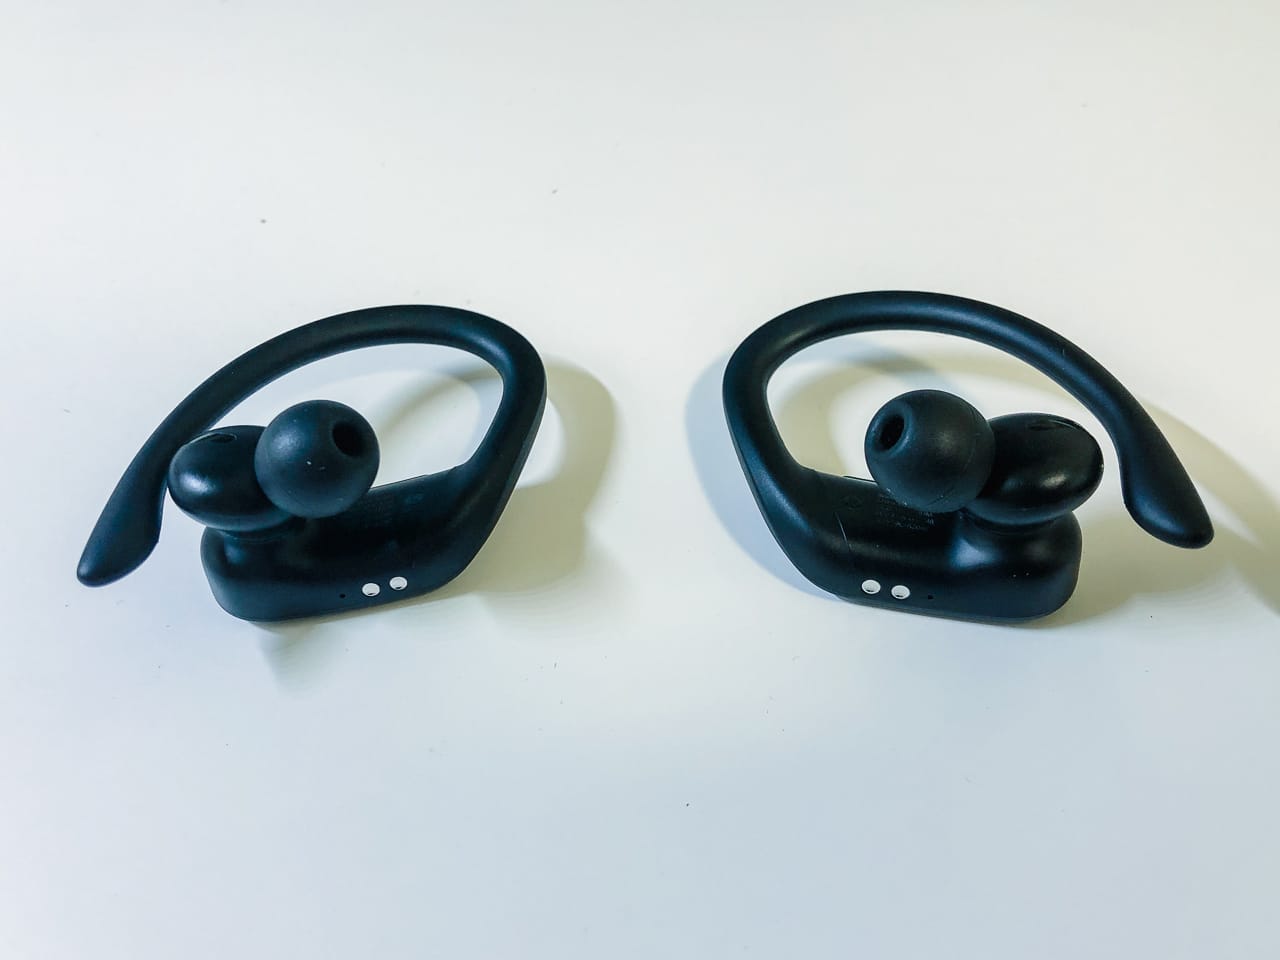 when are powerbeats pro ivory coming out